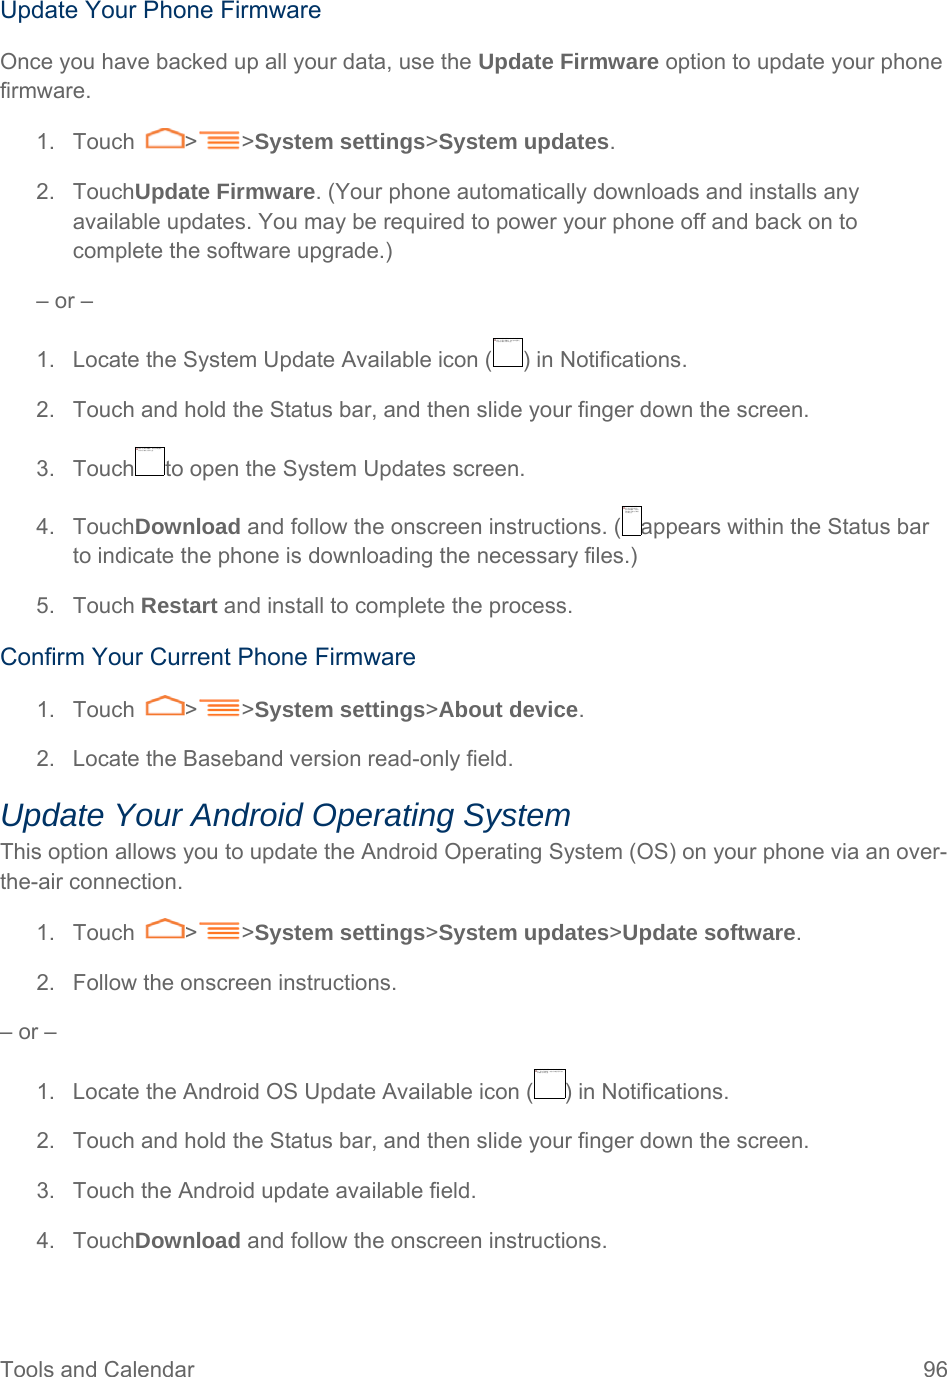 Tools and Calendar  96 Update Your Phone Firmware Once you have backed up all your data, use the Update Firmware option to update your phone firmware. 1. Touch  &gt; &gt;System settings&gt;System updates.  2. TouchUpdate Firmware. (Your phone automatically downloads and installs any available updates. You may be required to power your phone off and back on to complete the software upgrade.) – or – 1.  Locate the System Update Available icon ( ) in Notifications. 2.  Touch and hold the Status bar, and then slide your finger down the screen. 3.  Touch to open the System Updates screen. 4. TouchDownload and follow the onscreen instructions. ( appears within the Status bar to indicate the phone is downloading the necessary files.) 5. Touch Restart and install to complete the process. Confirm Your Current Phone Firmware 1. Touch  &gt; &gt;System settings&gt;About device.  2.  Locate the Baseband version read-only field.  Update Your Android Operating System This option allows you to update the Android Operating System (OS) on your phone via an over-the-air connection.  1. Touch  &gt; &gt;System settings&gt;System updates&gt;Update software.  2.  Follow the onscreen instructions. – or – 1.  Locate the Android OS Update Available icon ( ) in Notifications. 2.  Touch and hold the Status bar, and then slide your finger down the screen. 3.  Touch the Android update available field. 4. TouchDownload and follow the onscreen instructions.  无法显示链接的图像。该文件可能已被移动、重命名或删除。请验证该链接是否指向正确的文件和位置。无法显示链接的图像。该文件可能已被移动、重命名或删除。请验证该链接是否指向正确的文件和位置。无法显示链接的图像。该文件可能已被移动、重命名或删除。请验证该链接是否指向正确的文件和位置。无法显示链接的图像。该文件可能已被移动、重命名或删除。请验证该链接是否指向正确的文件和位置。